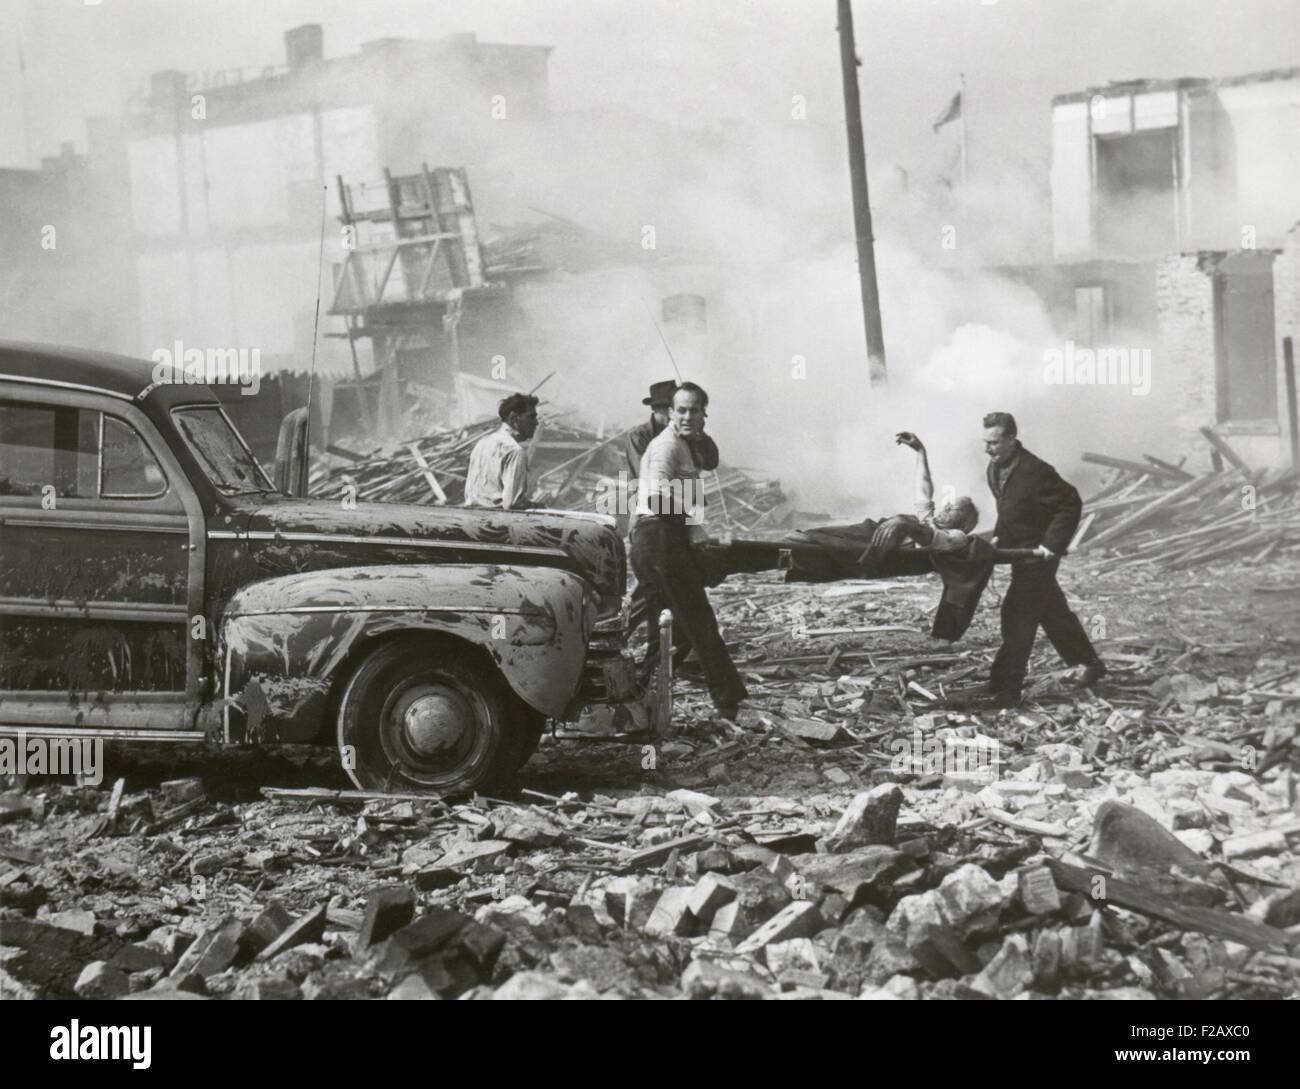 Movie still from a U.S. Army film about a hypothetical attack using an atomic bomb, Nov. 1948. Still shows rescue workers are shown removing the injured from shattered homes. (BSLOC 2015 2 31) Stock Photo